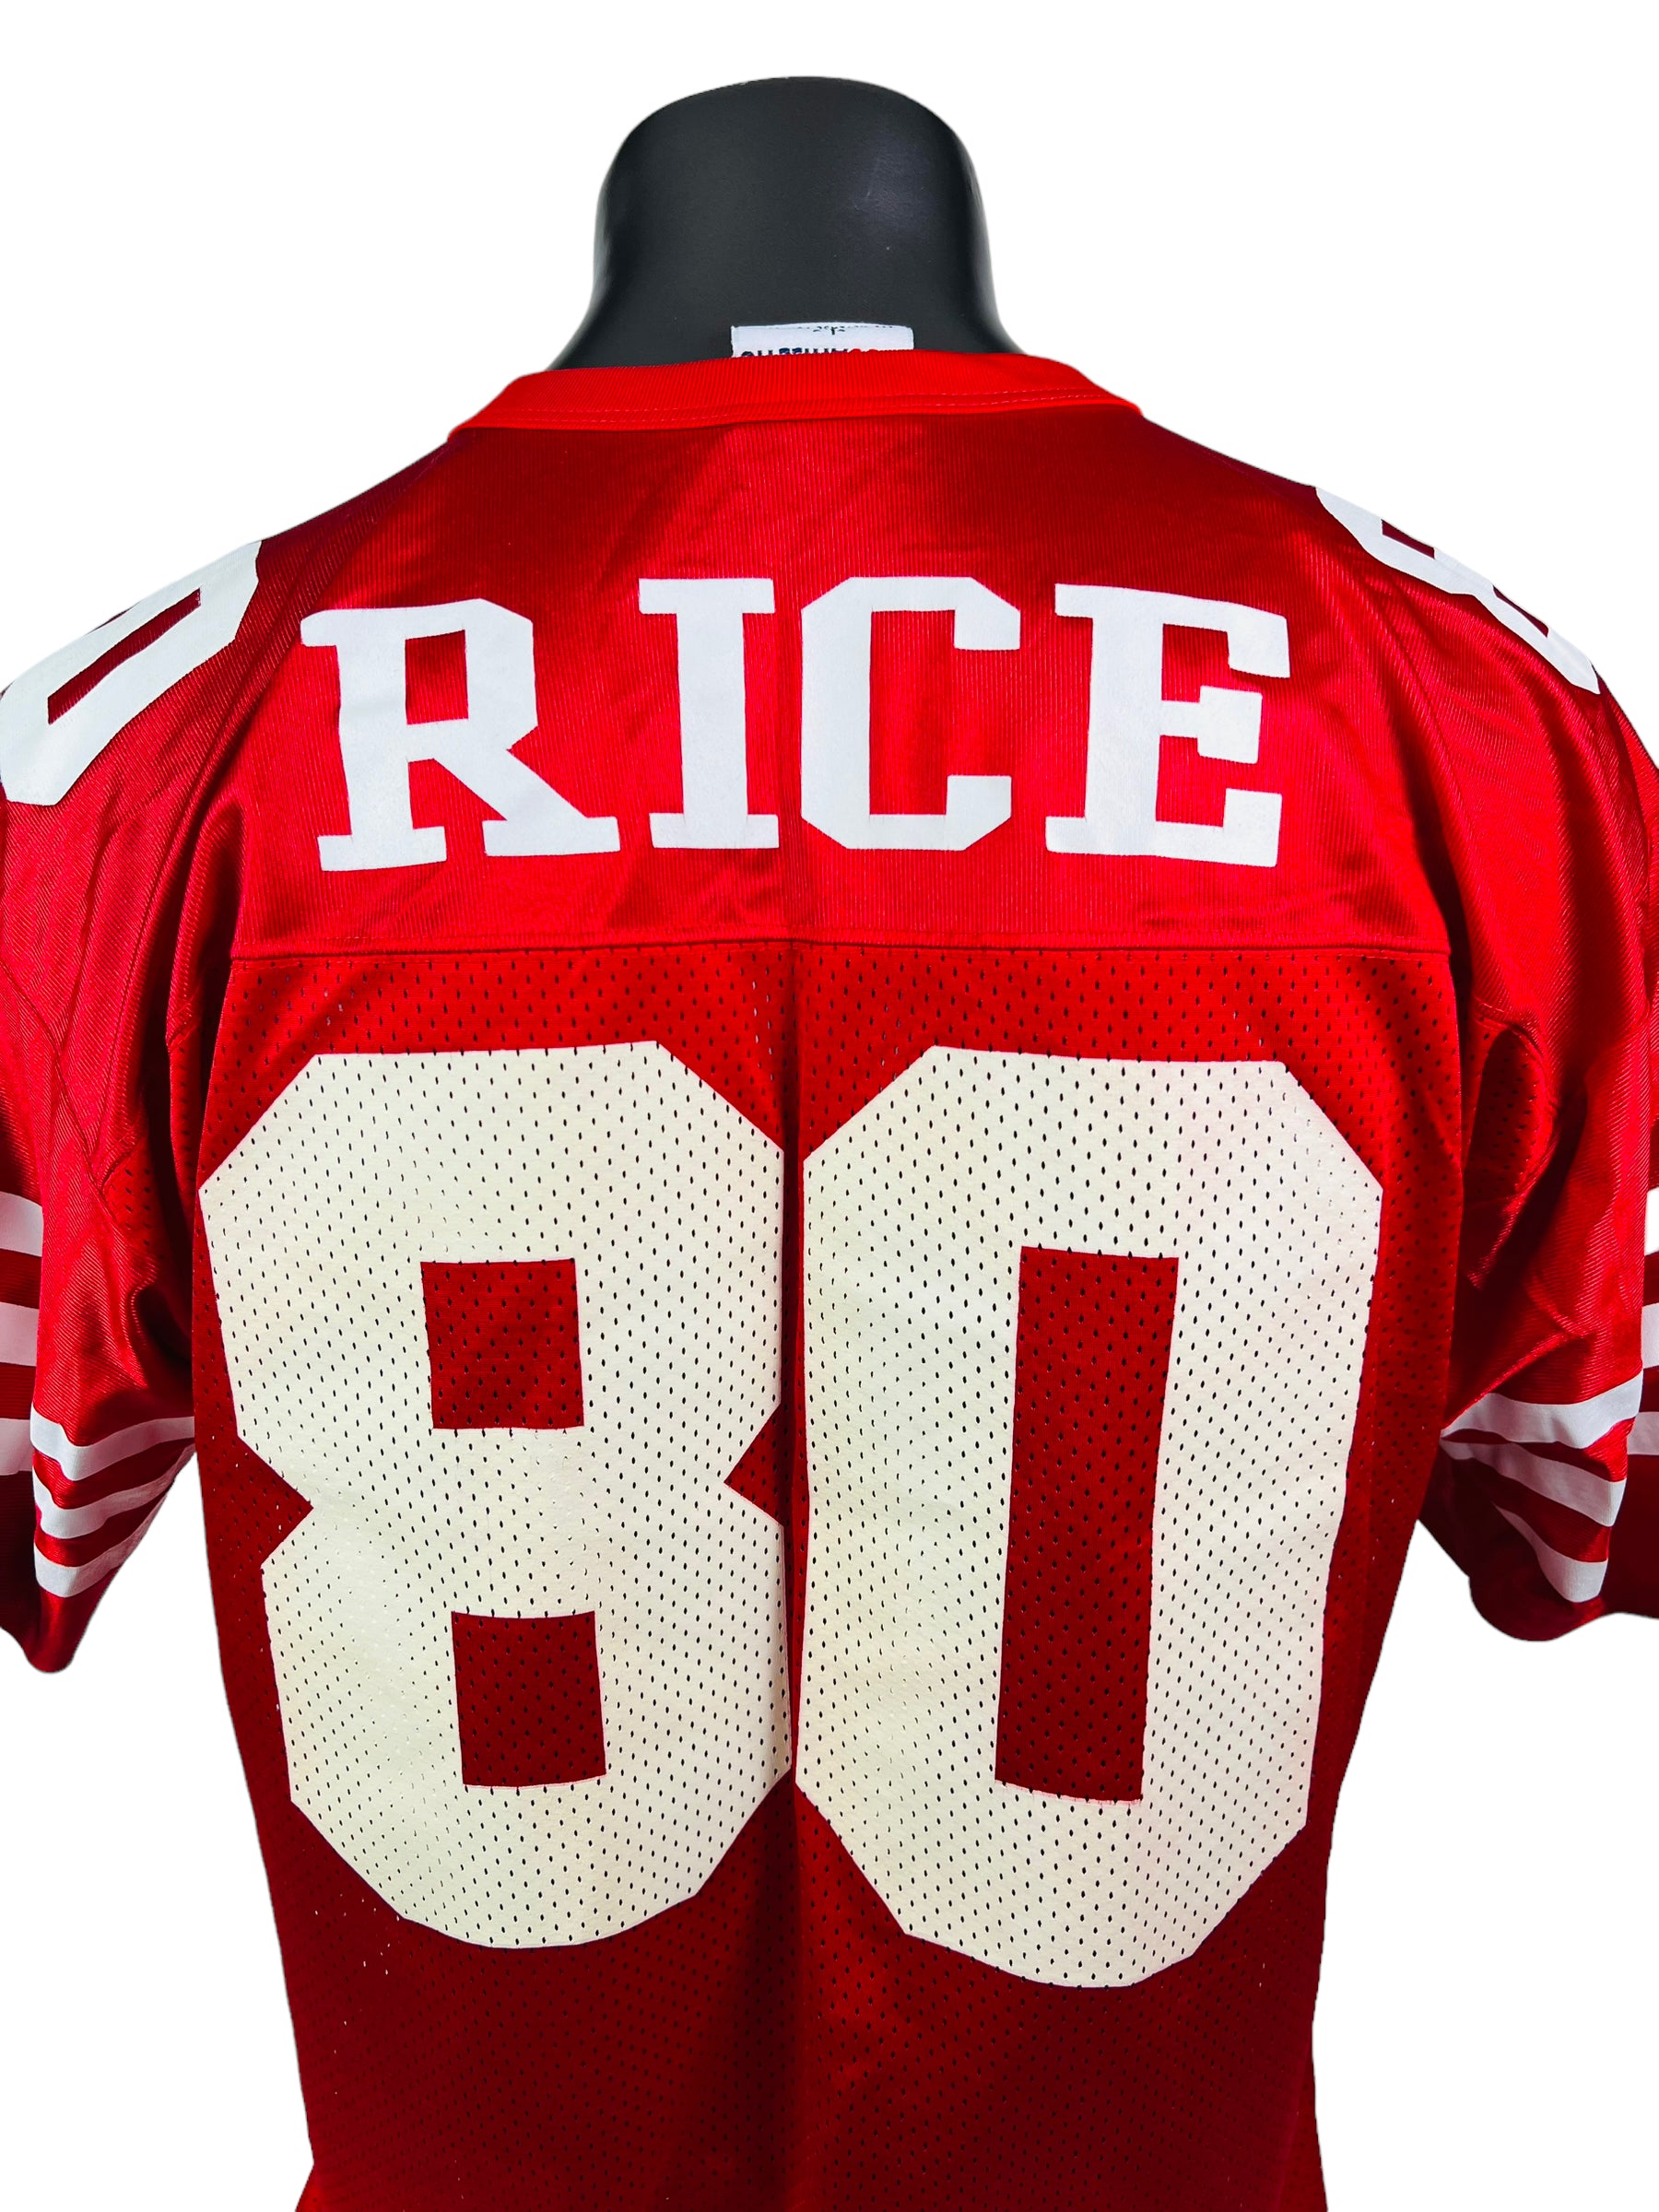 JERRY RICE SAN FRANCISCO 49ERS VINTAGE 1990'S LOGO ATHLETIC JERSEY